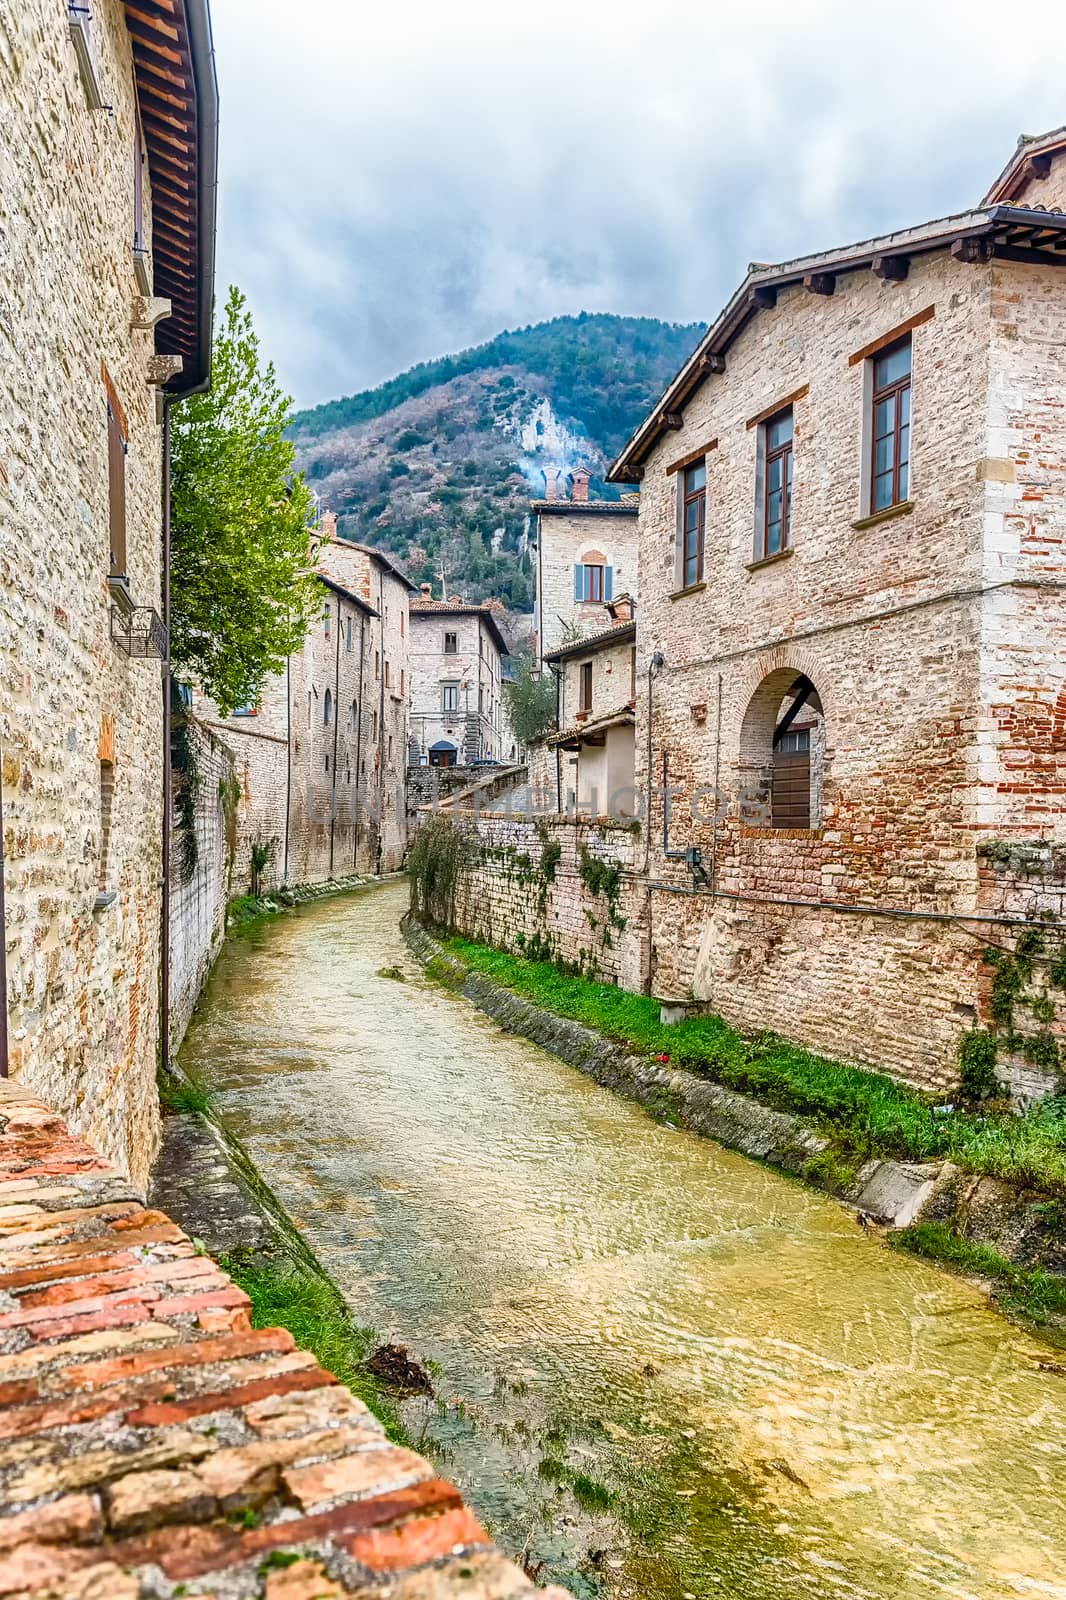 Walking in the picturesque and ancient streets of Gubbio, one of the most beautiful medieval towns in central Italy